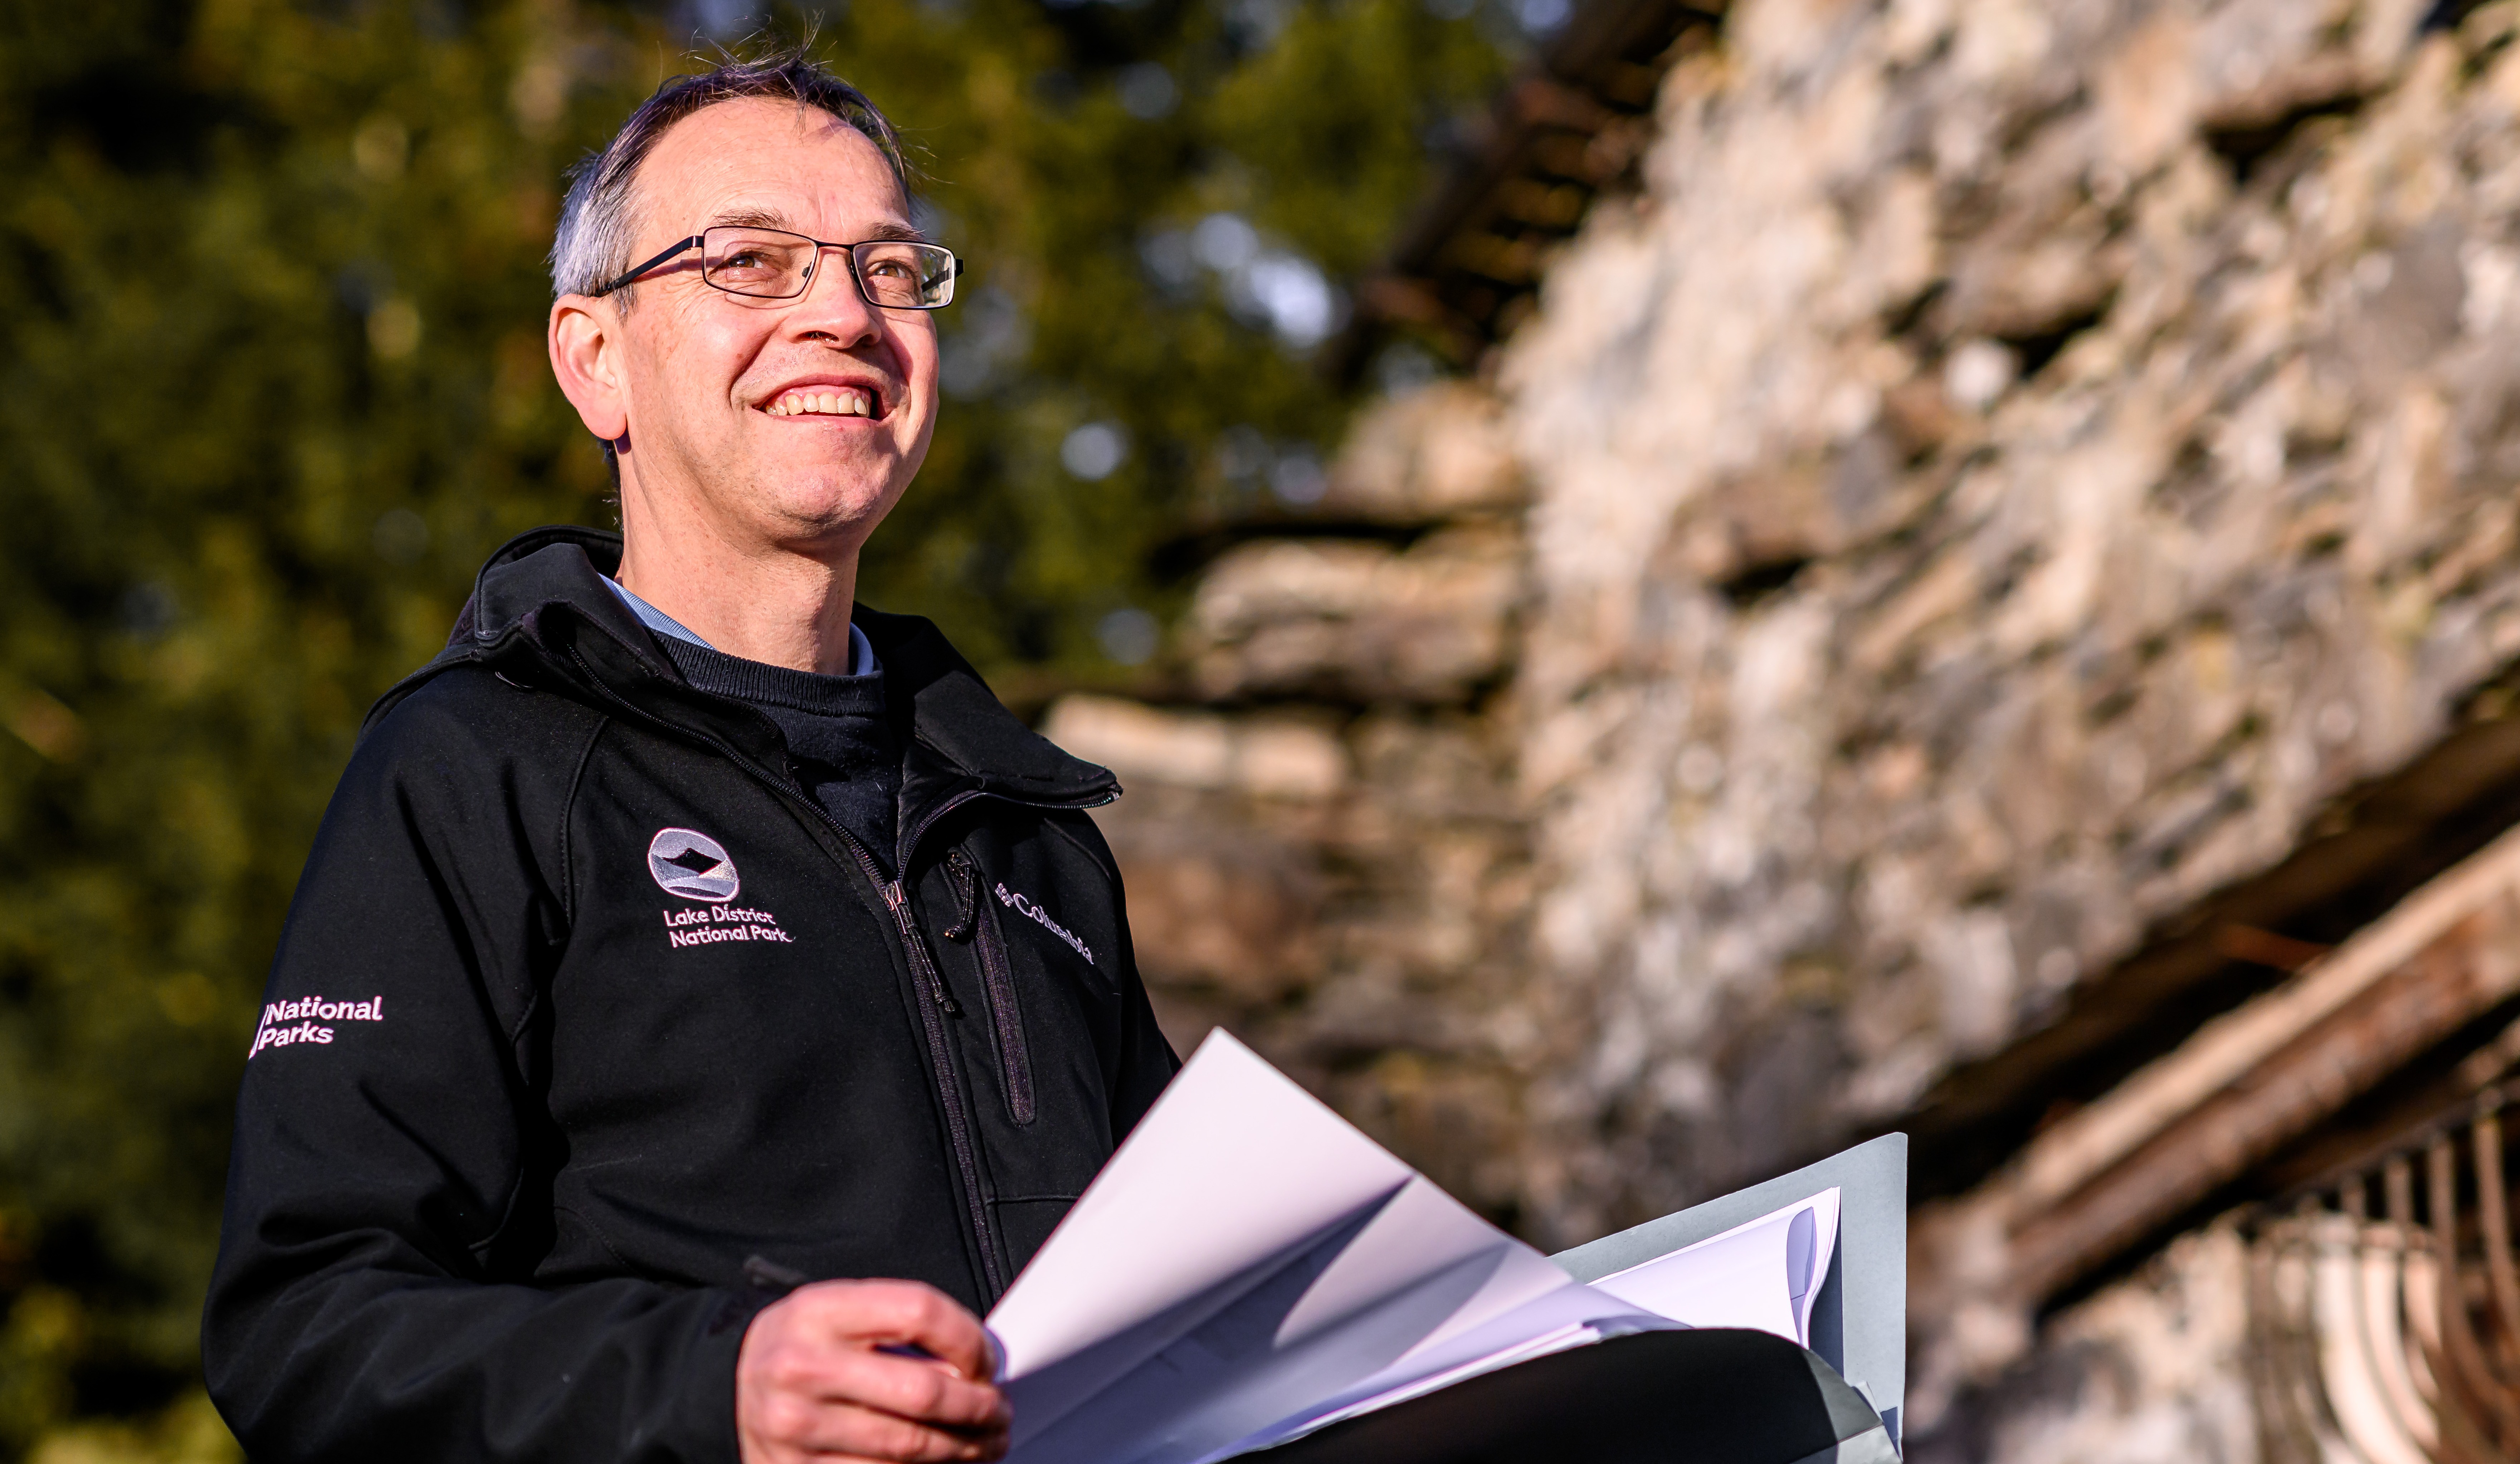 Male Planner standing outside a traditional lakeland building. He is wearing a black uniform jacket which show the LDNPA and National parks logos.